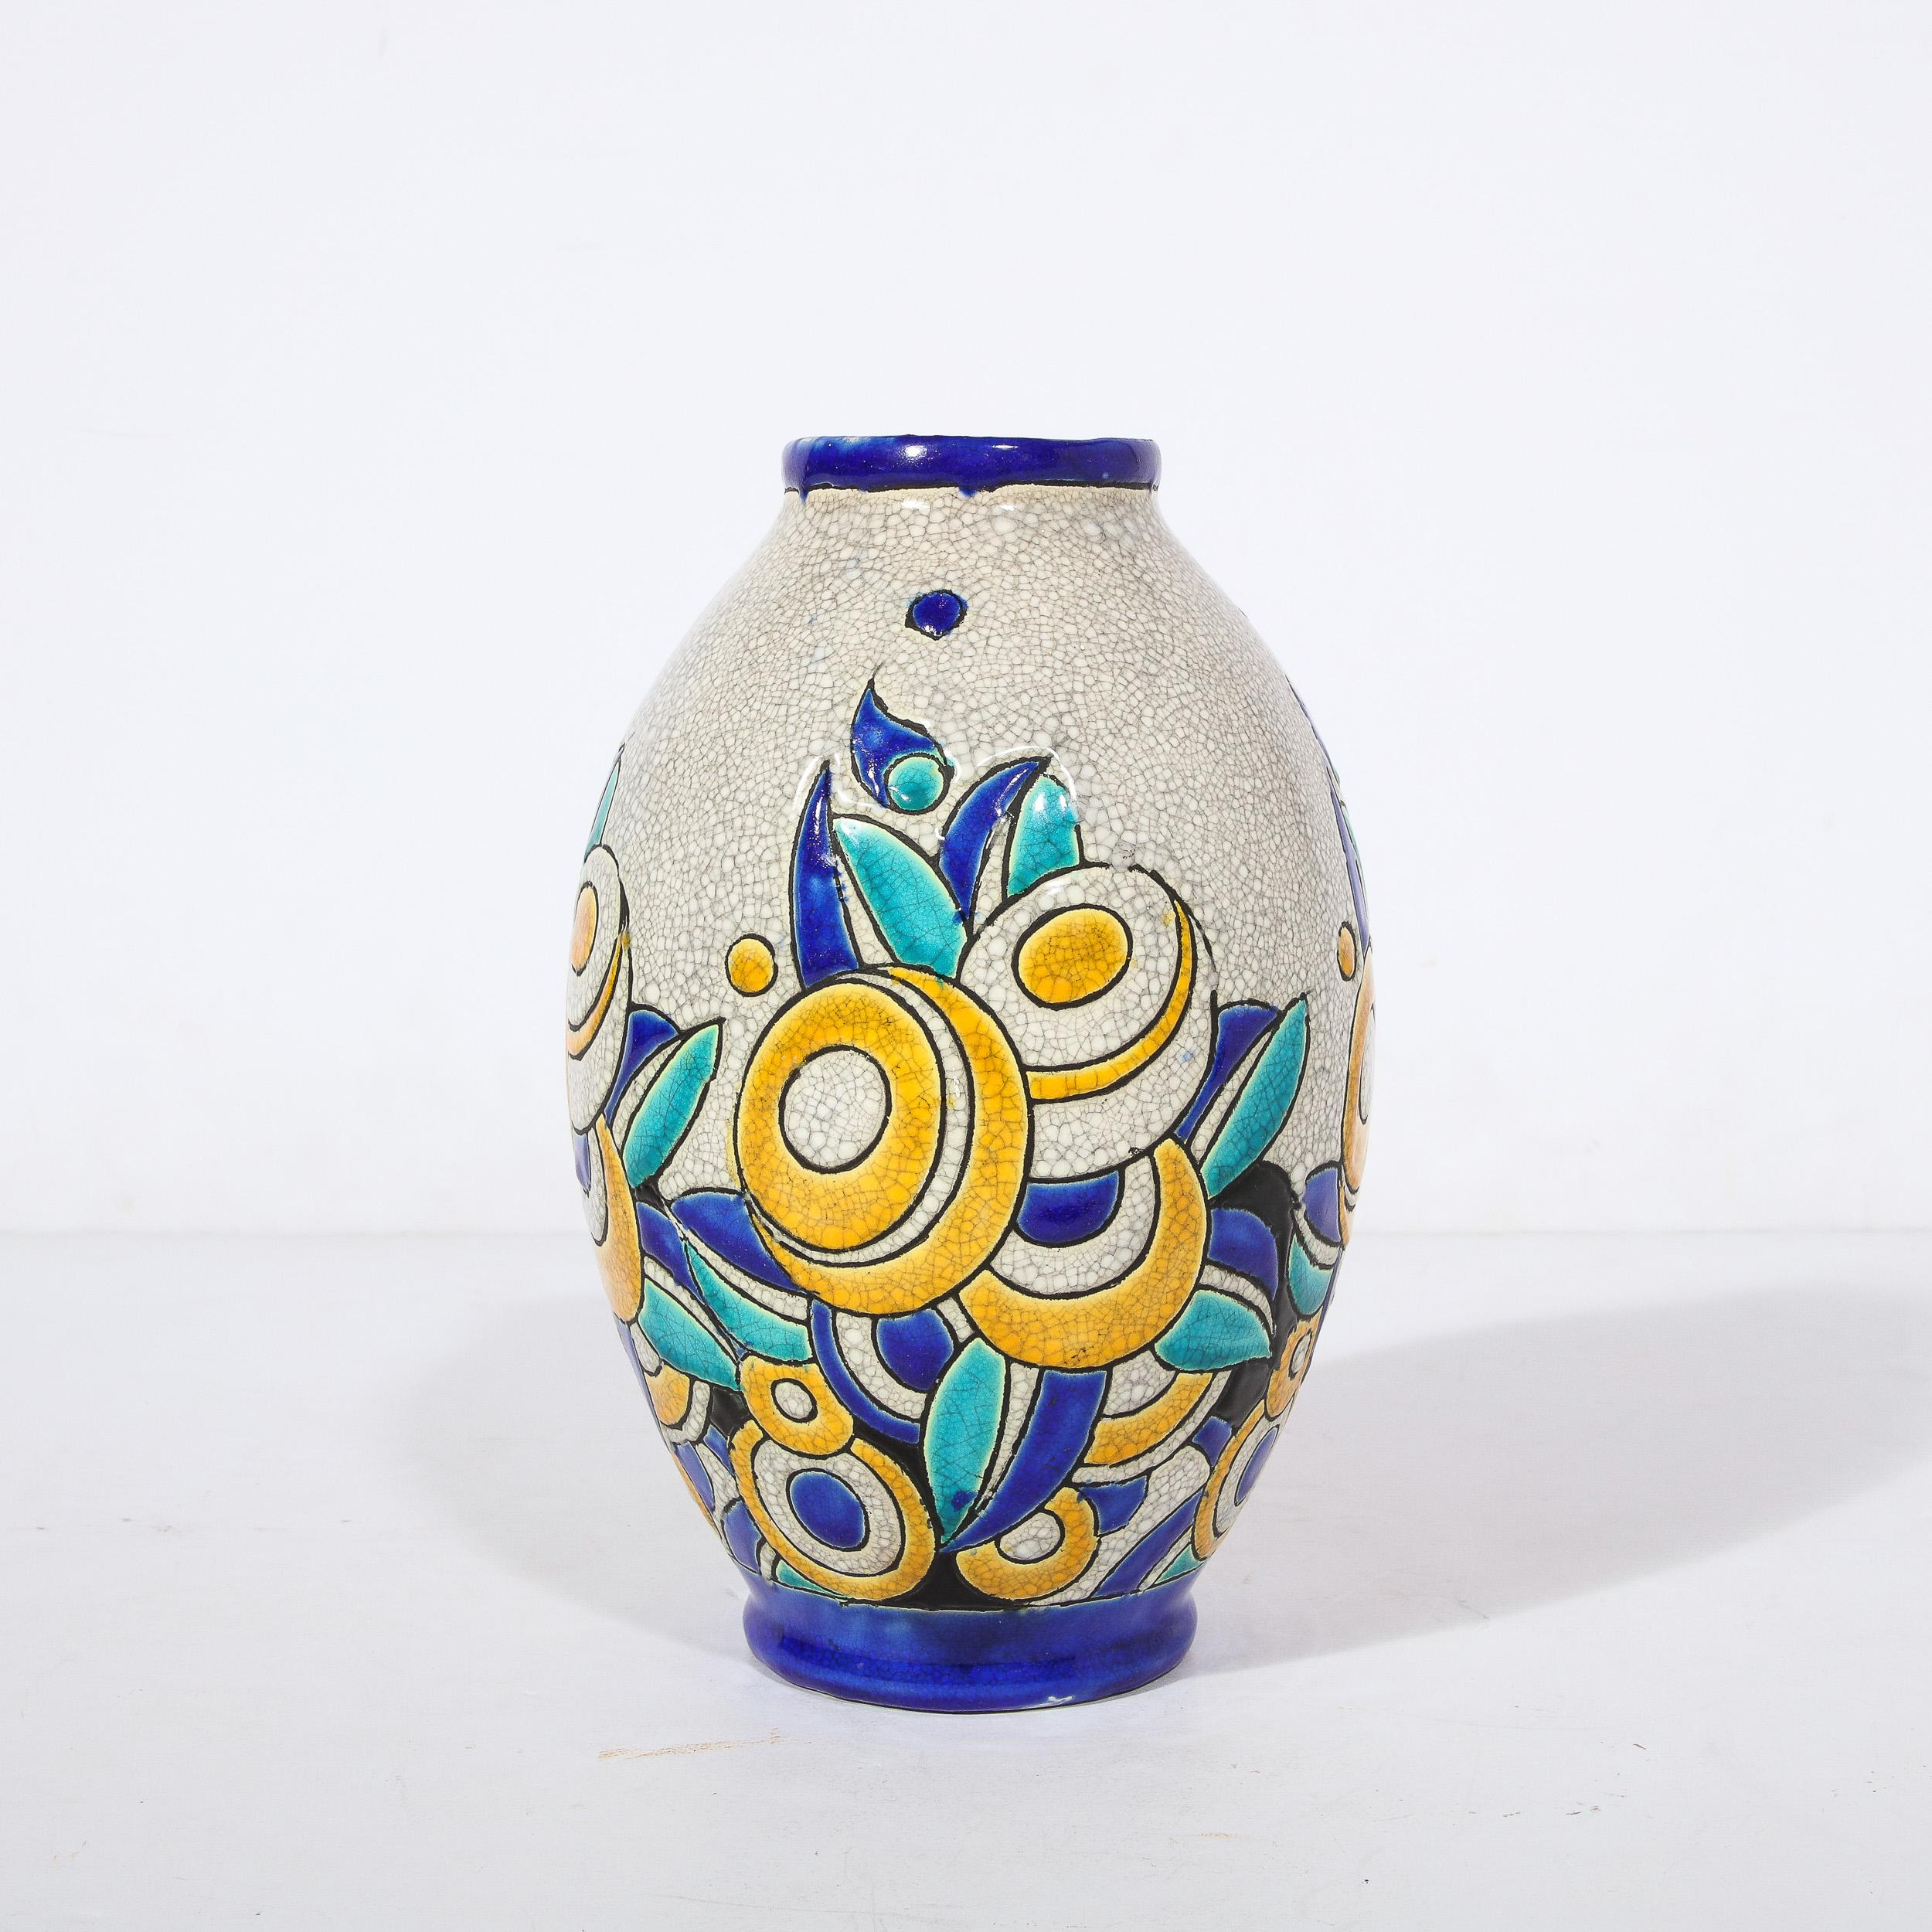 Art Deco Cubic Floral Ceramic Vase by Charles Catteau for Boch Freres Keramis For Sale 2